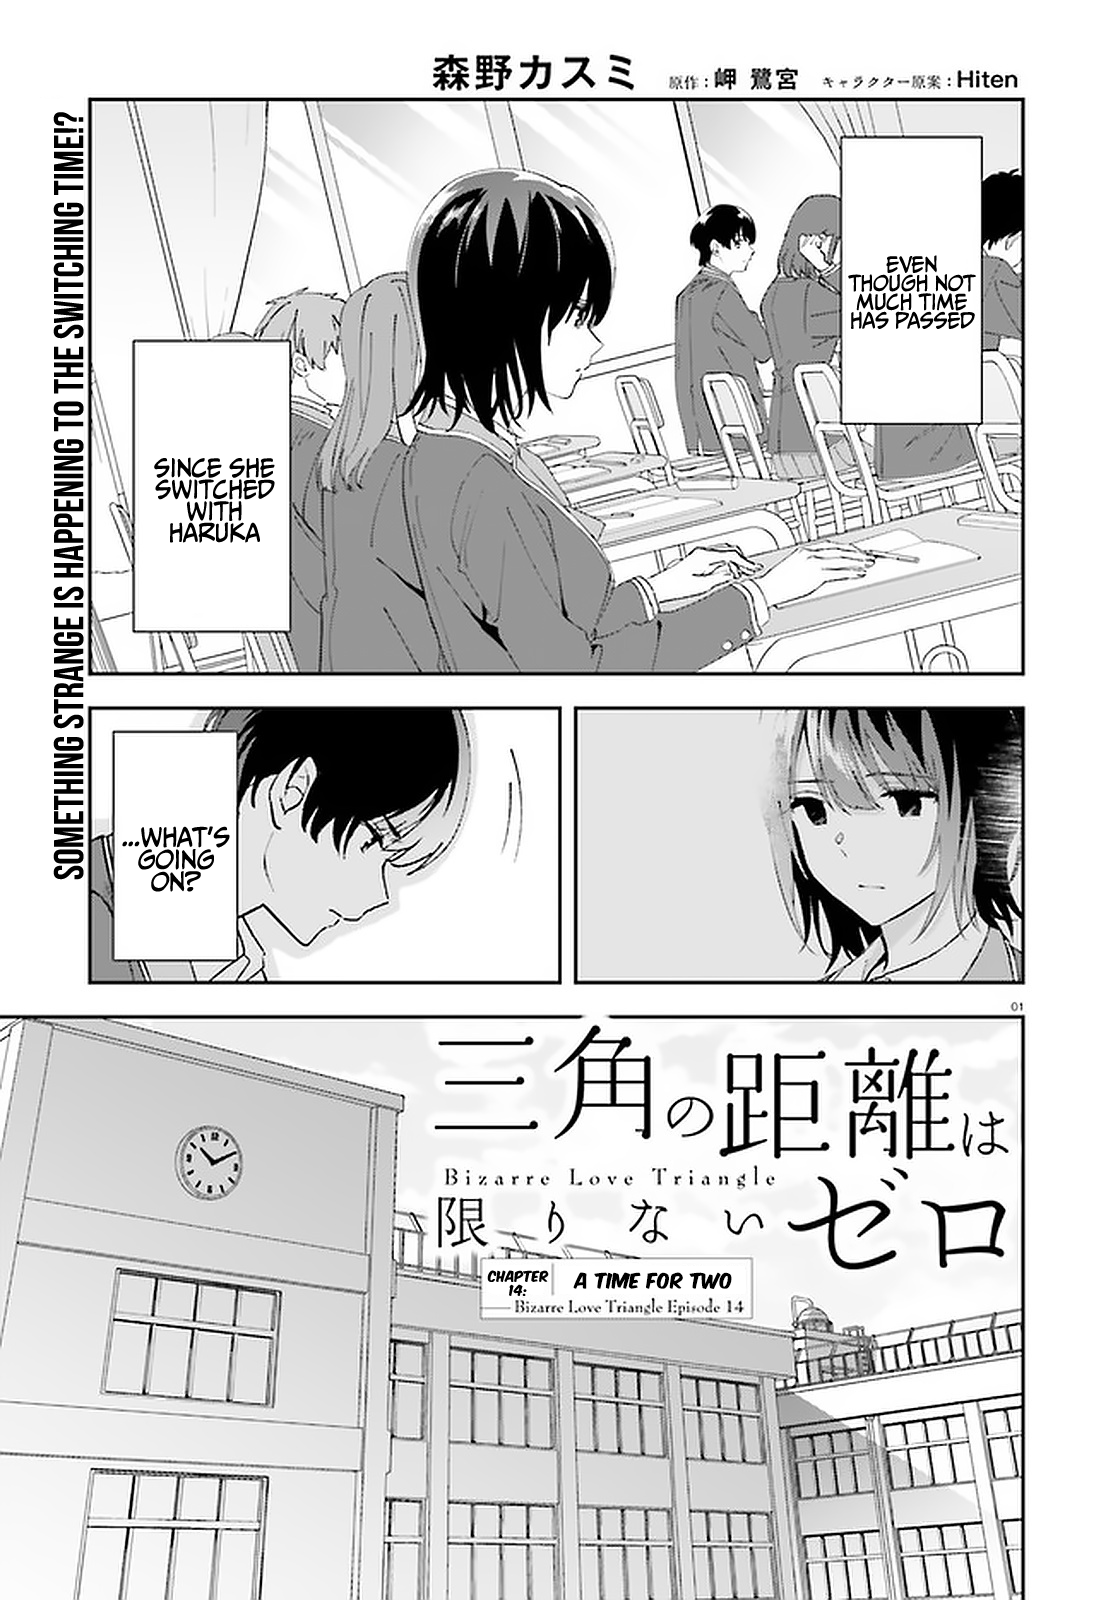 Bizarre Love Triangle Vol.3 Chapter 14: A Time For Two - Picture 2